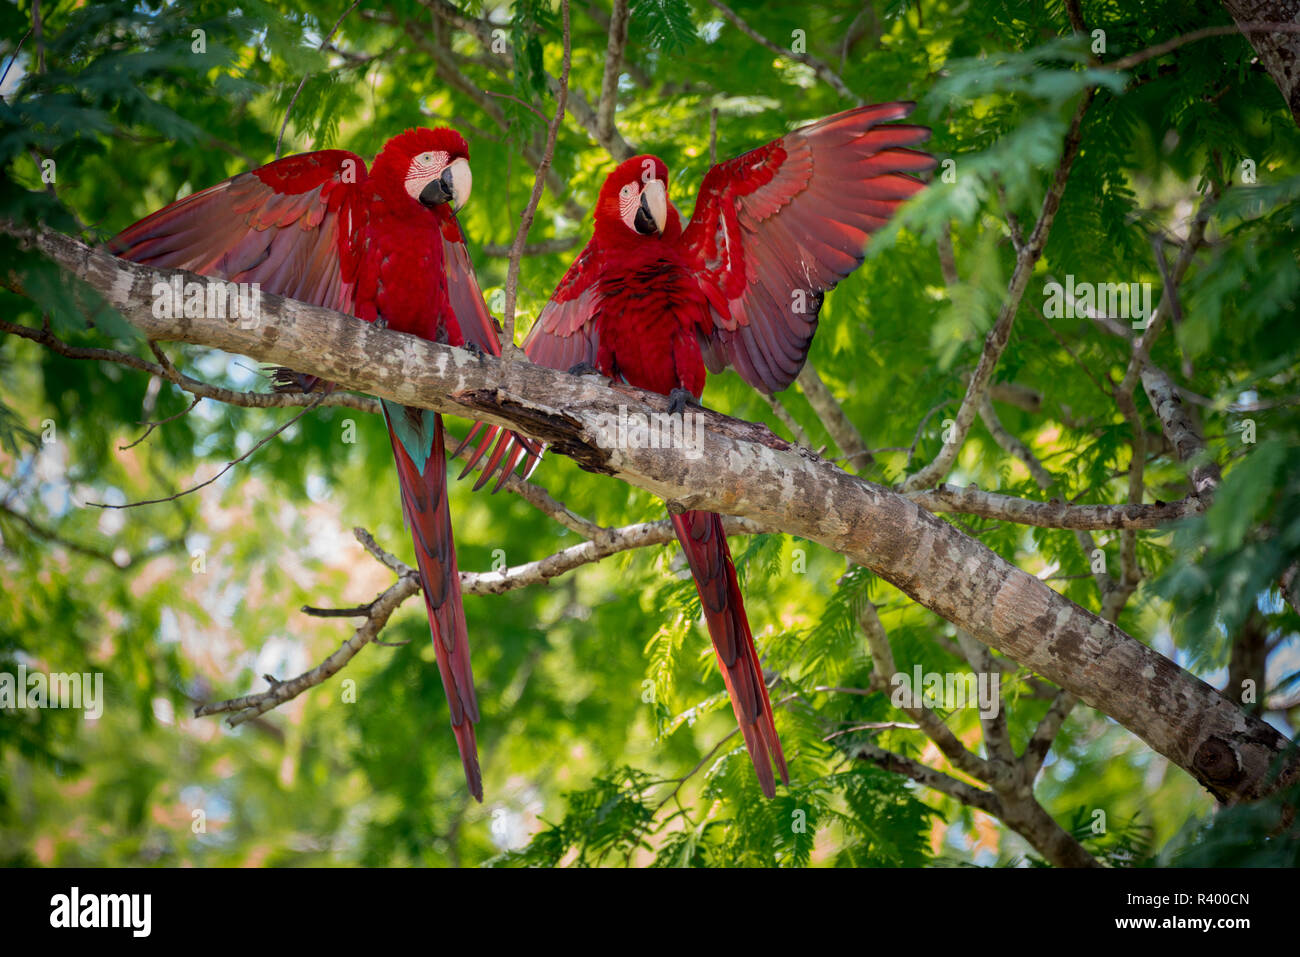 Red-and-green macaws (Ara chloropterus), animal couple with open wings in a tree, Pantanal, Mato Grosso do Sul, Brazil Stock Photo